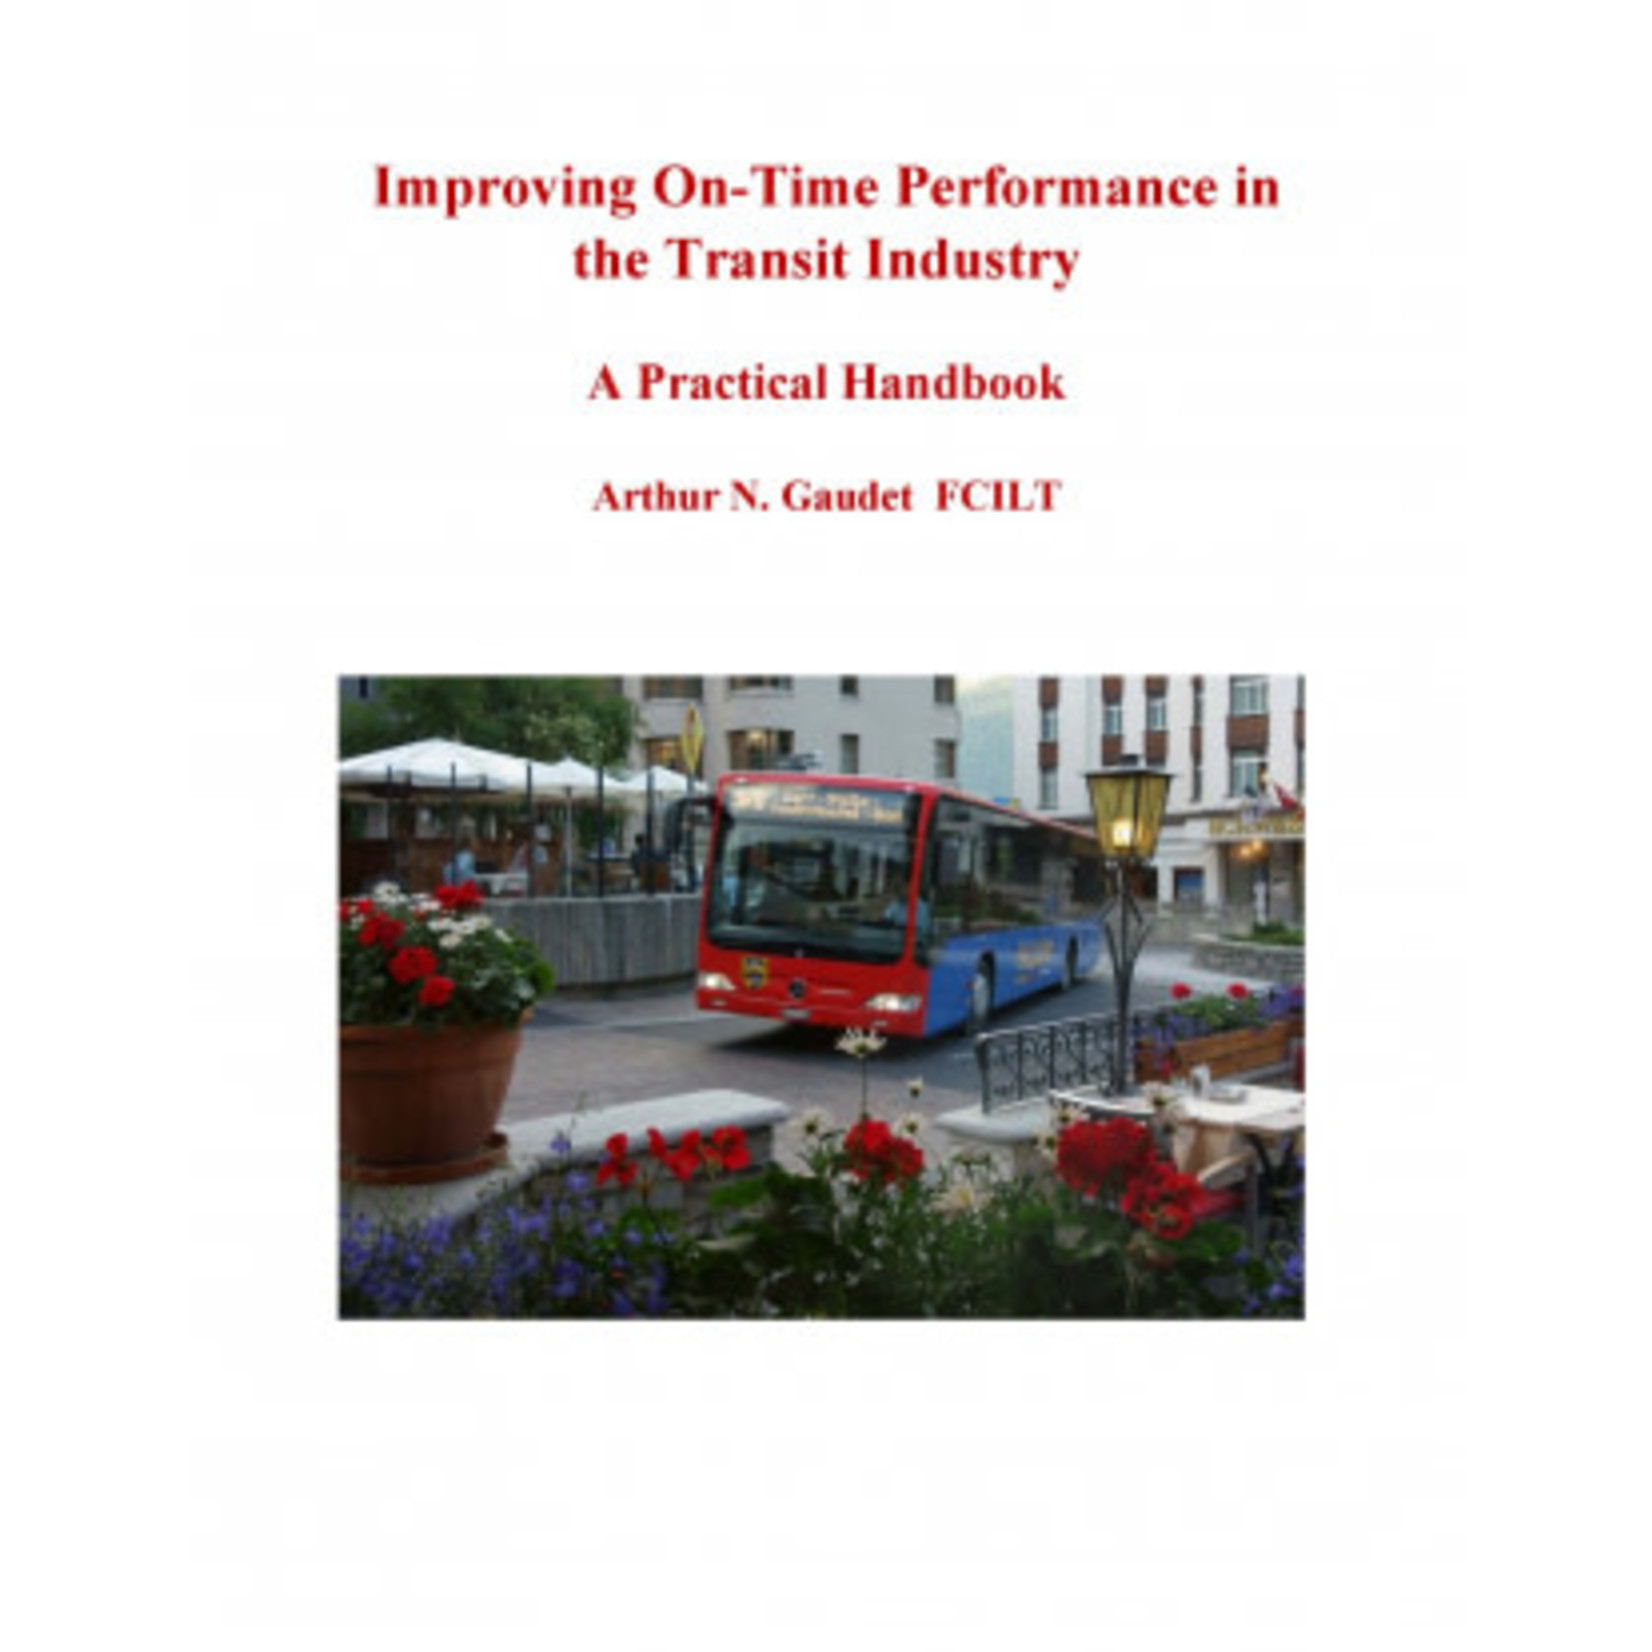 Improving On-Time Performance in the Transit Industry